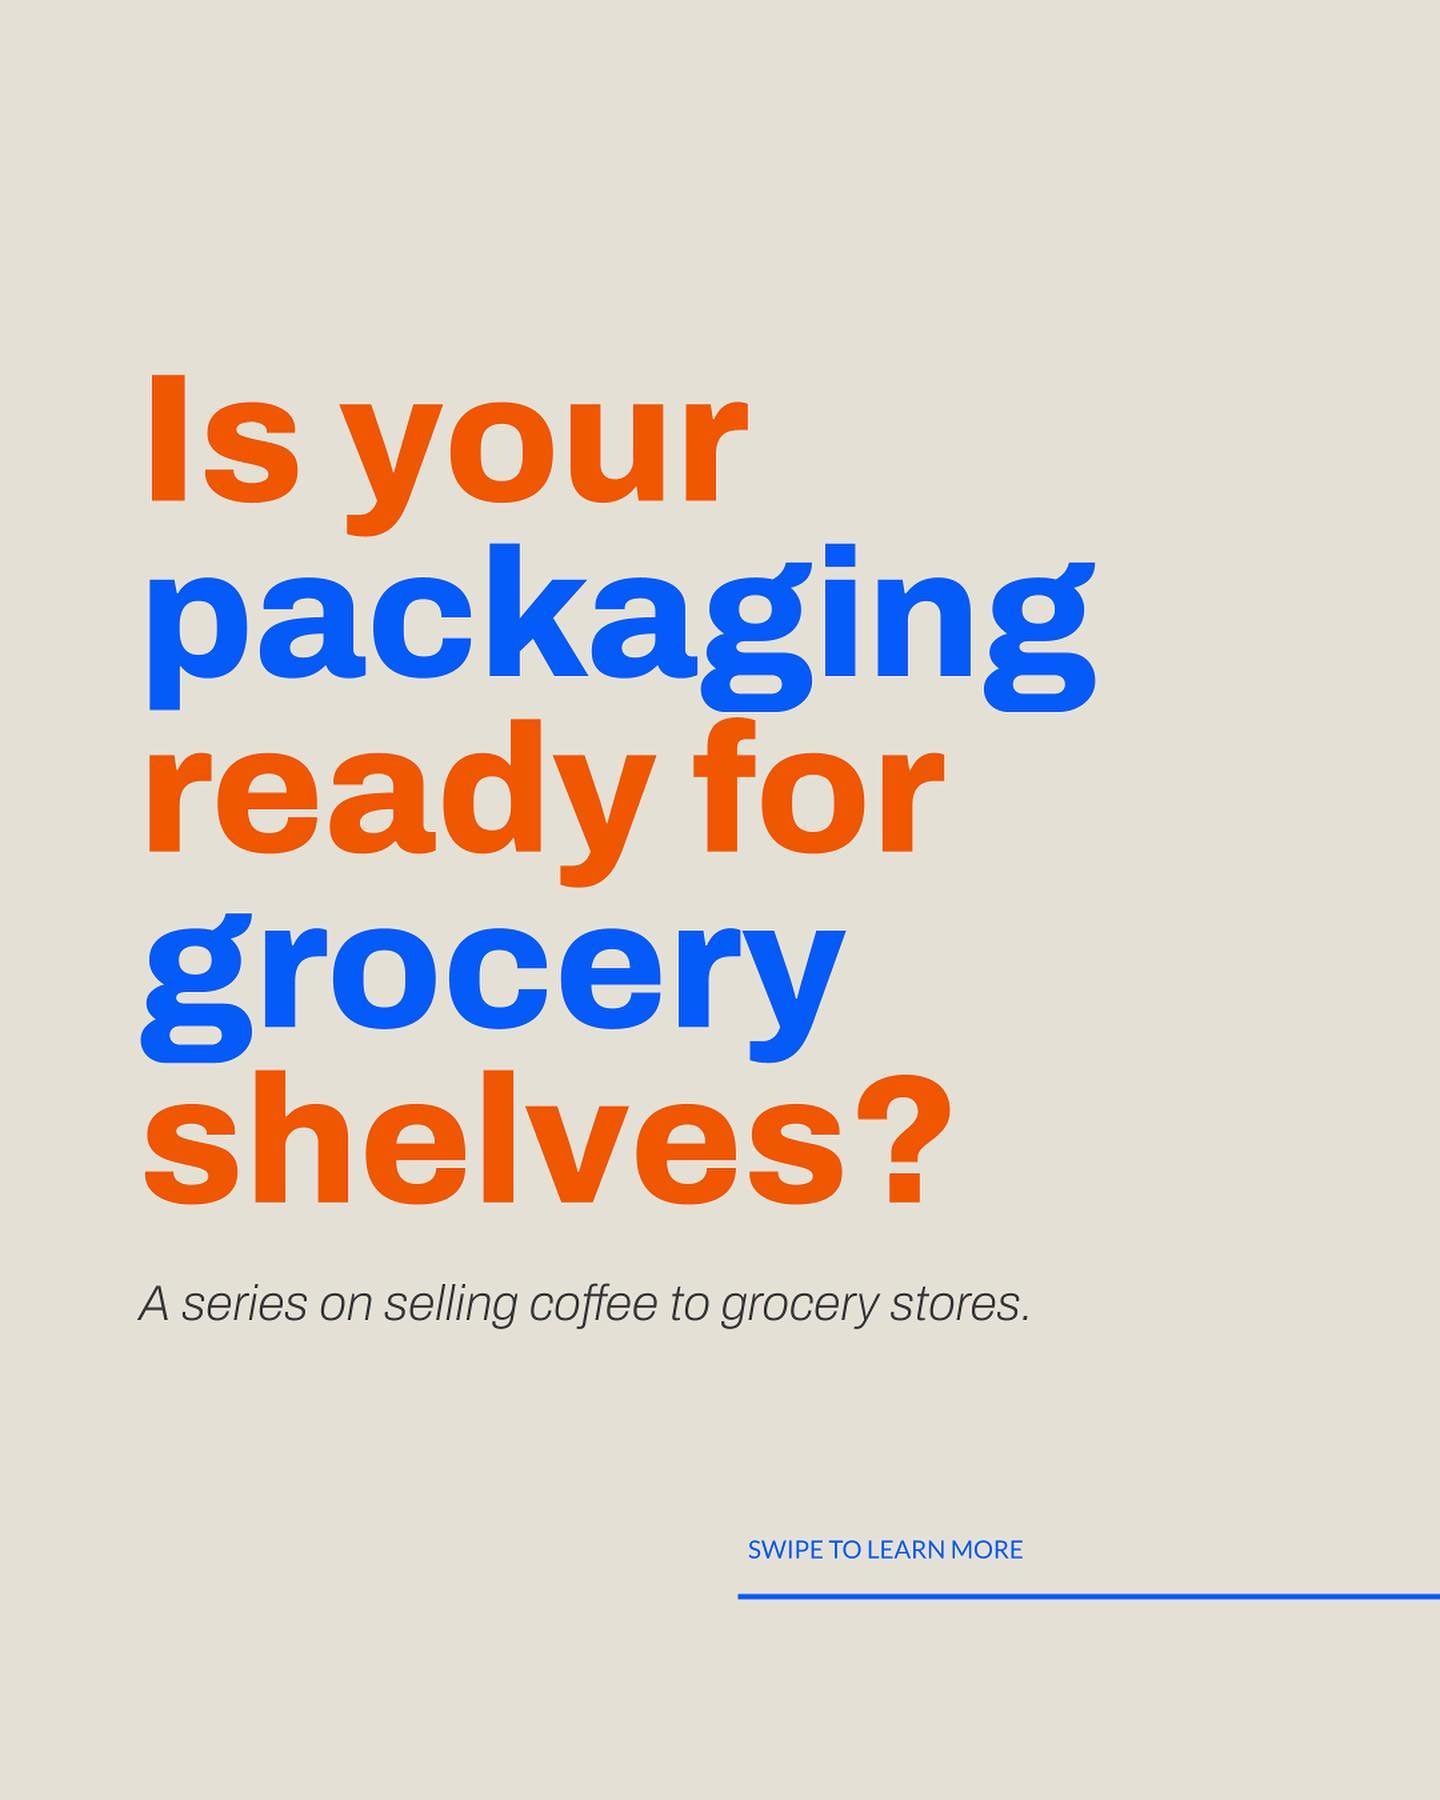 So you think you're ready to start selling to grocery stores? 

What about your packaging? Is it ready?

Is it designed to stand up well on its own?

Is the material durable enough to be shipped around the country and arrive in good condition?

Is yo